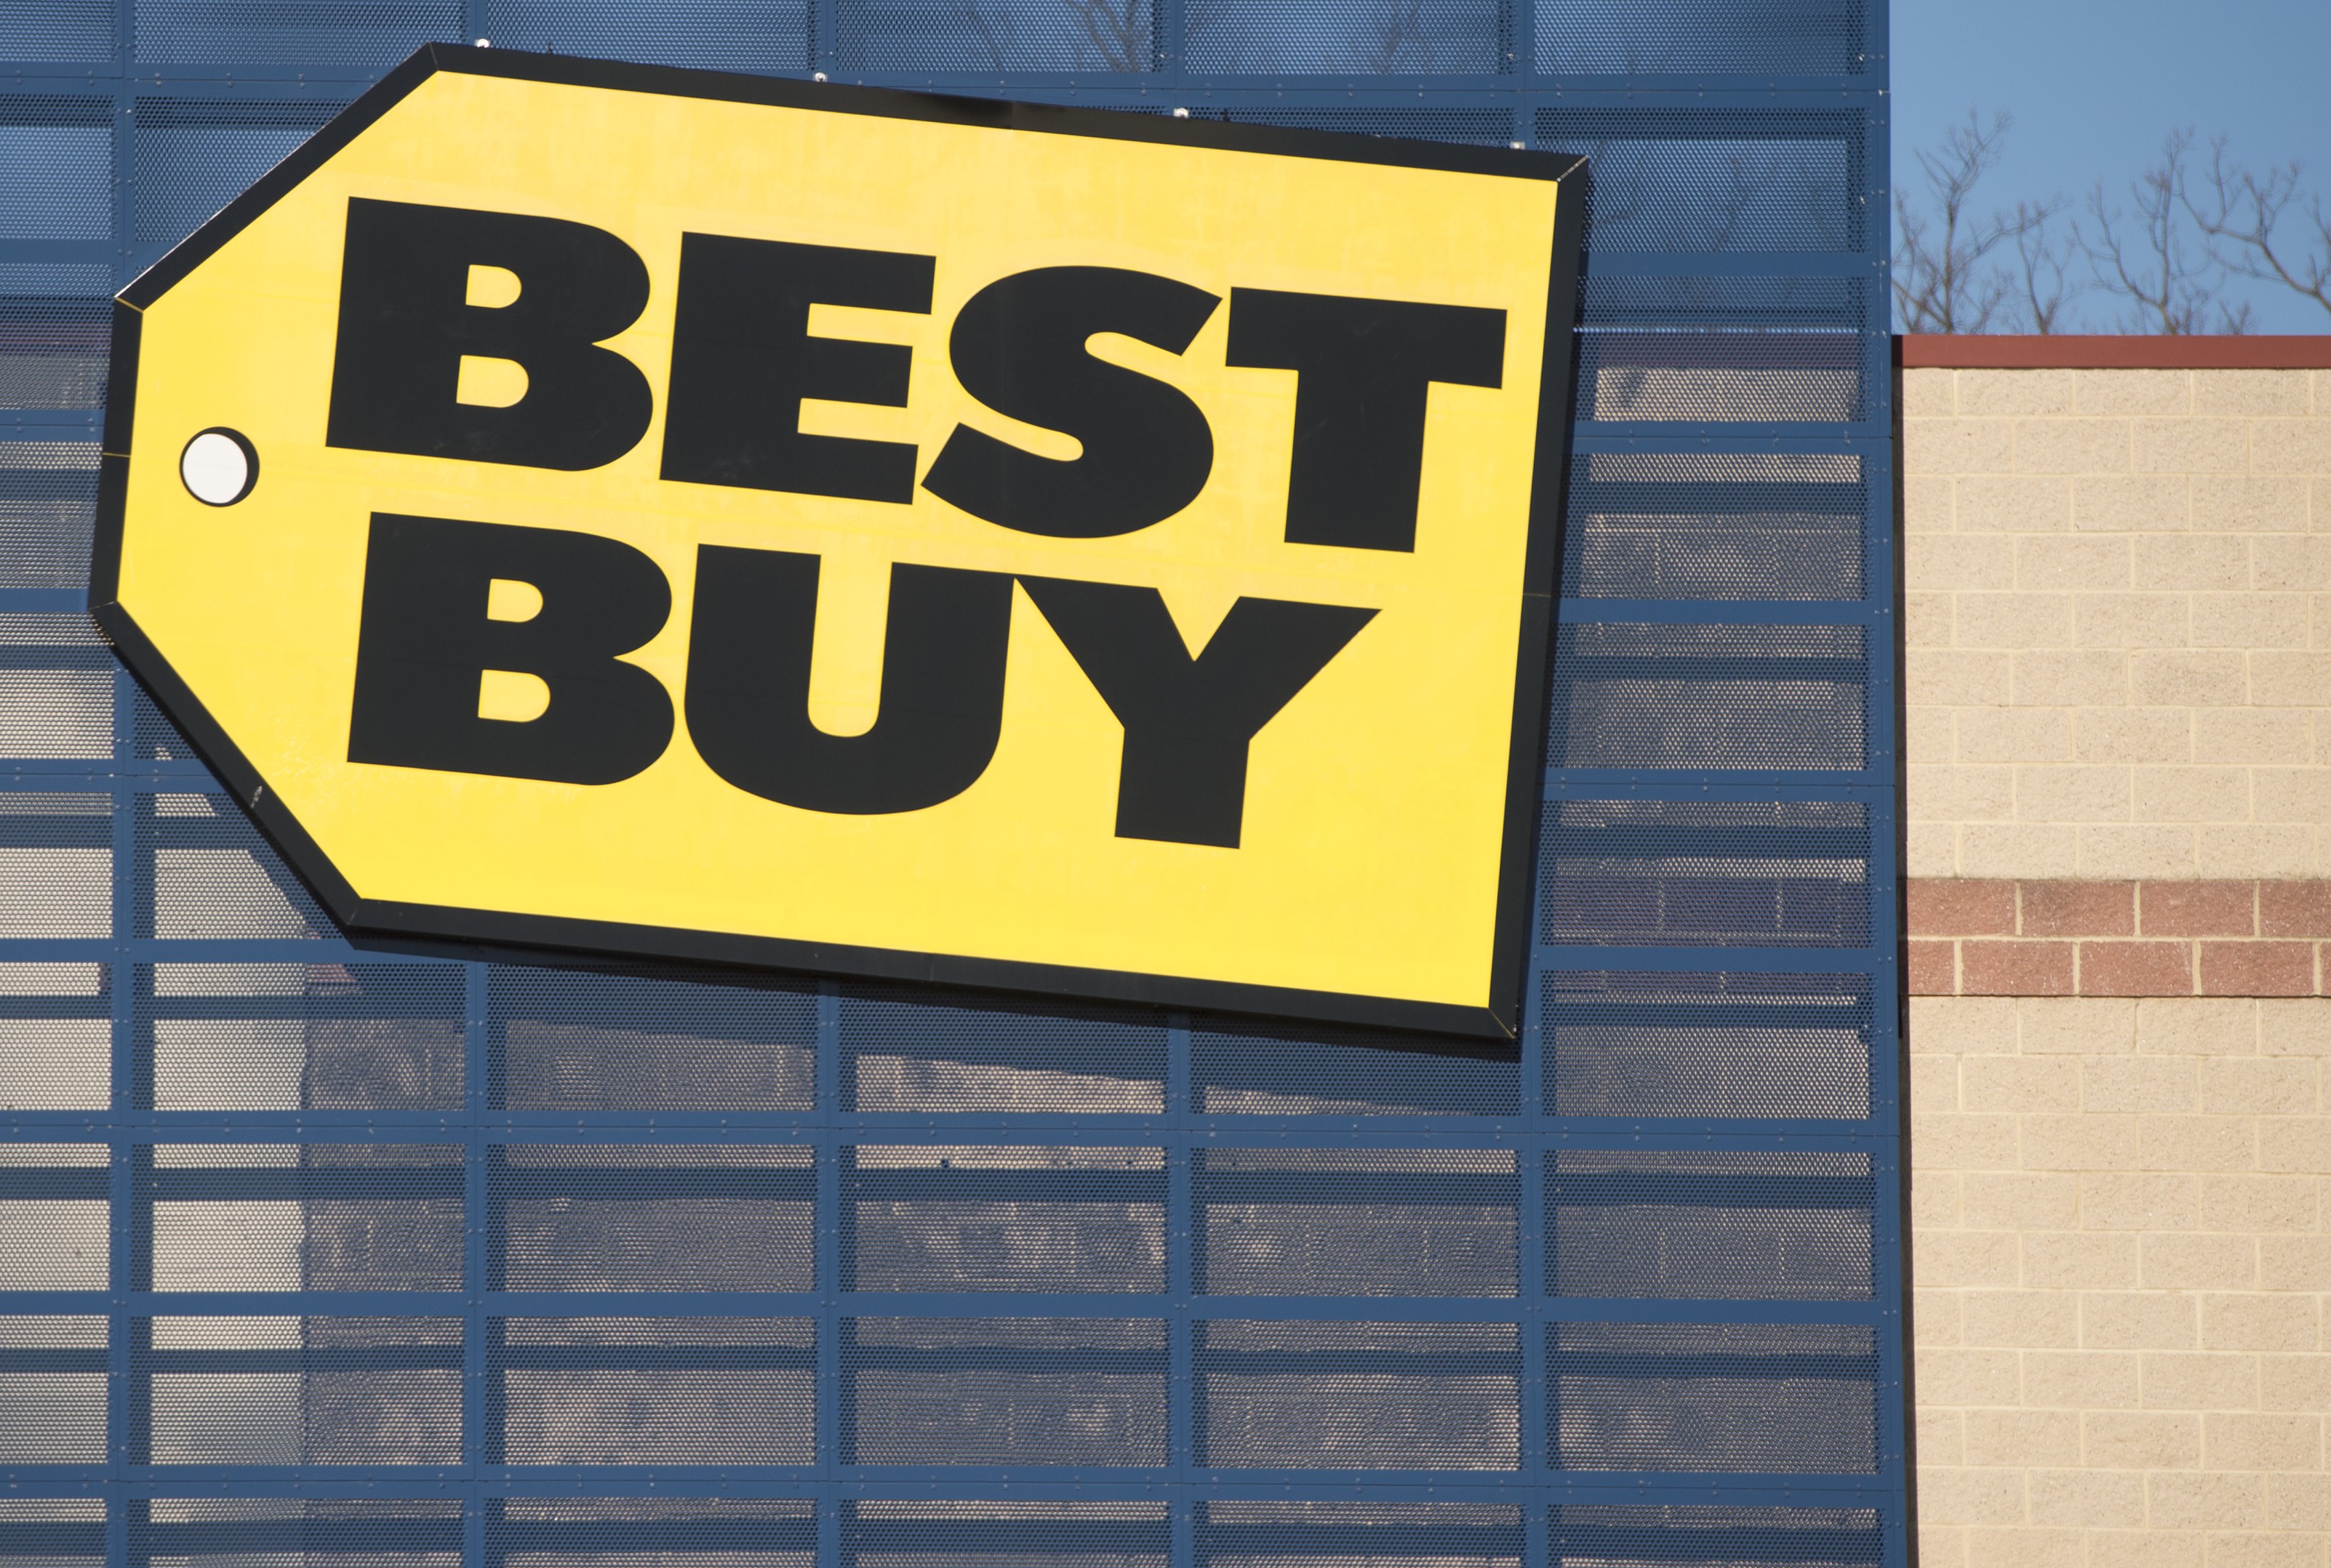 Black Friday 2016: What time does Best Buy open?